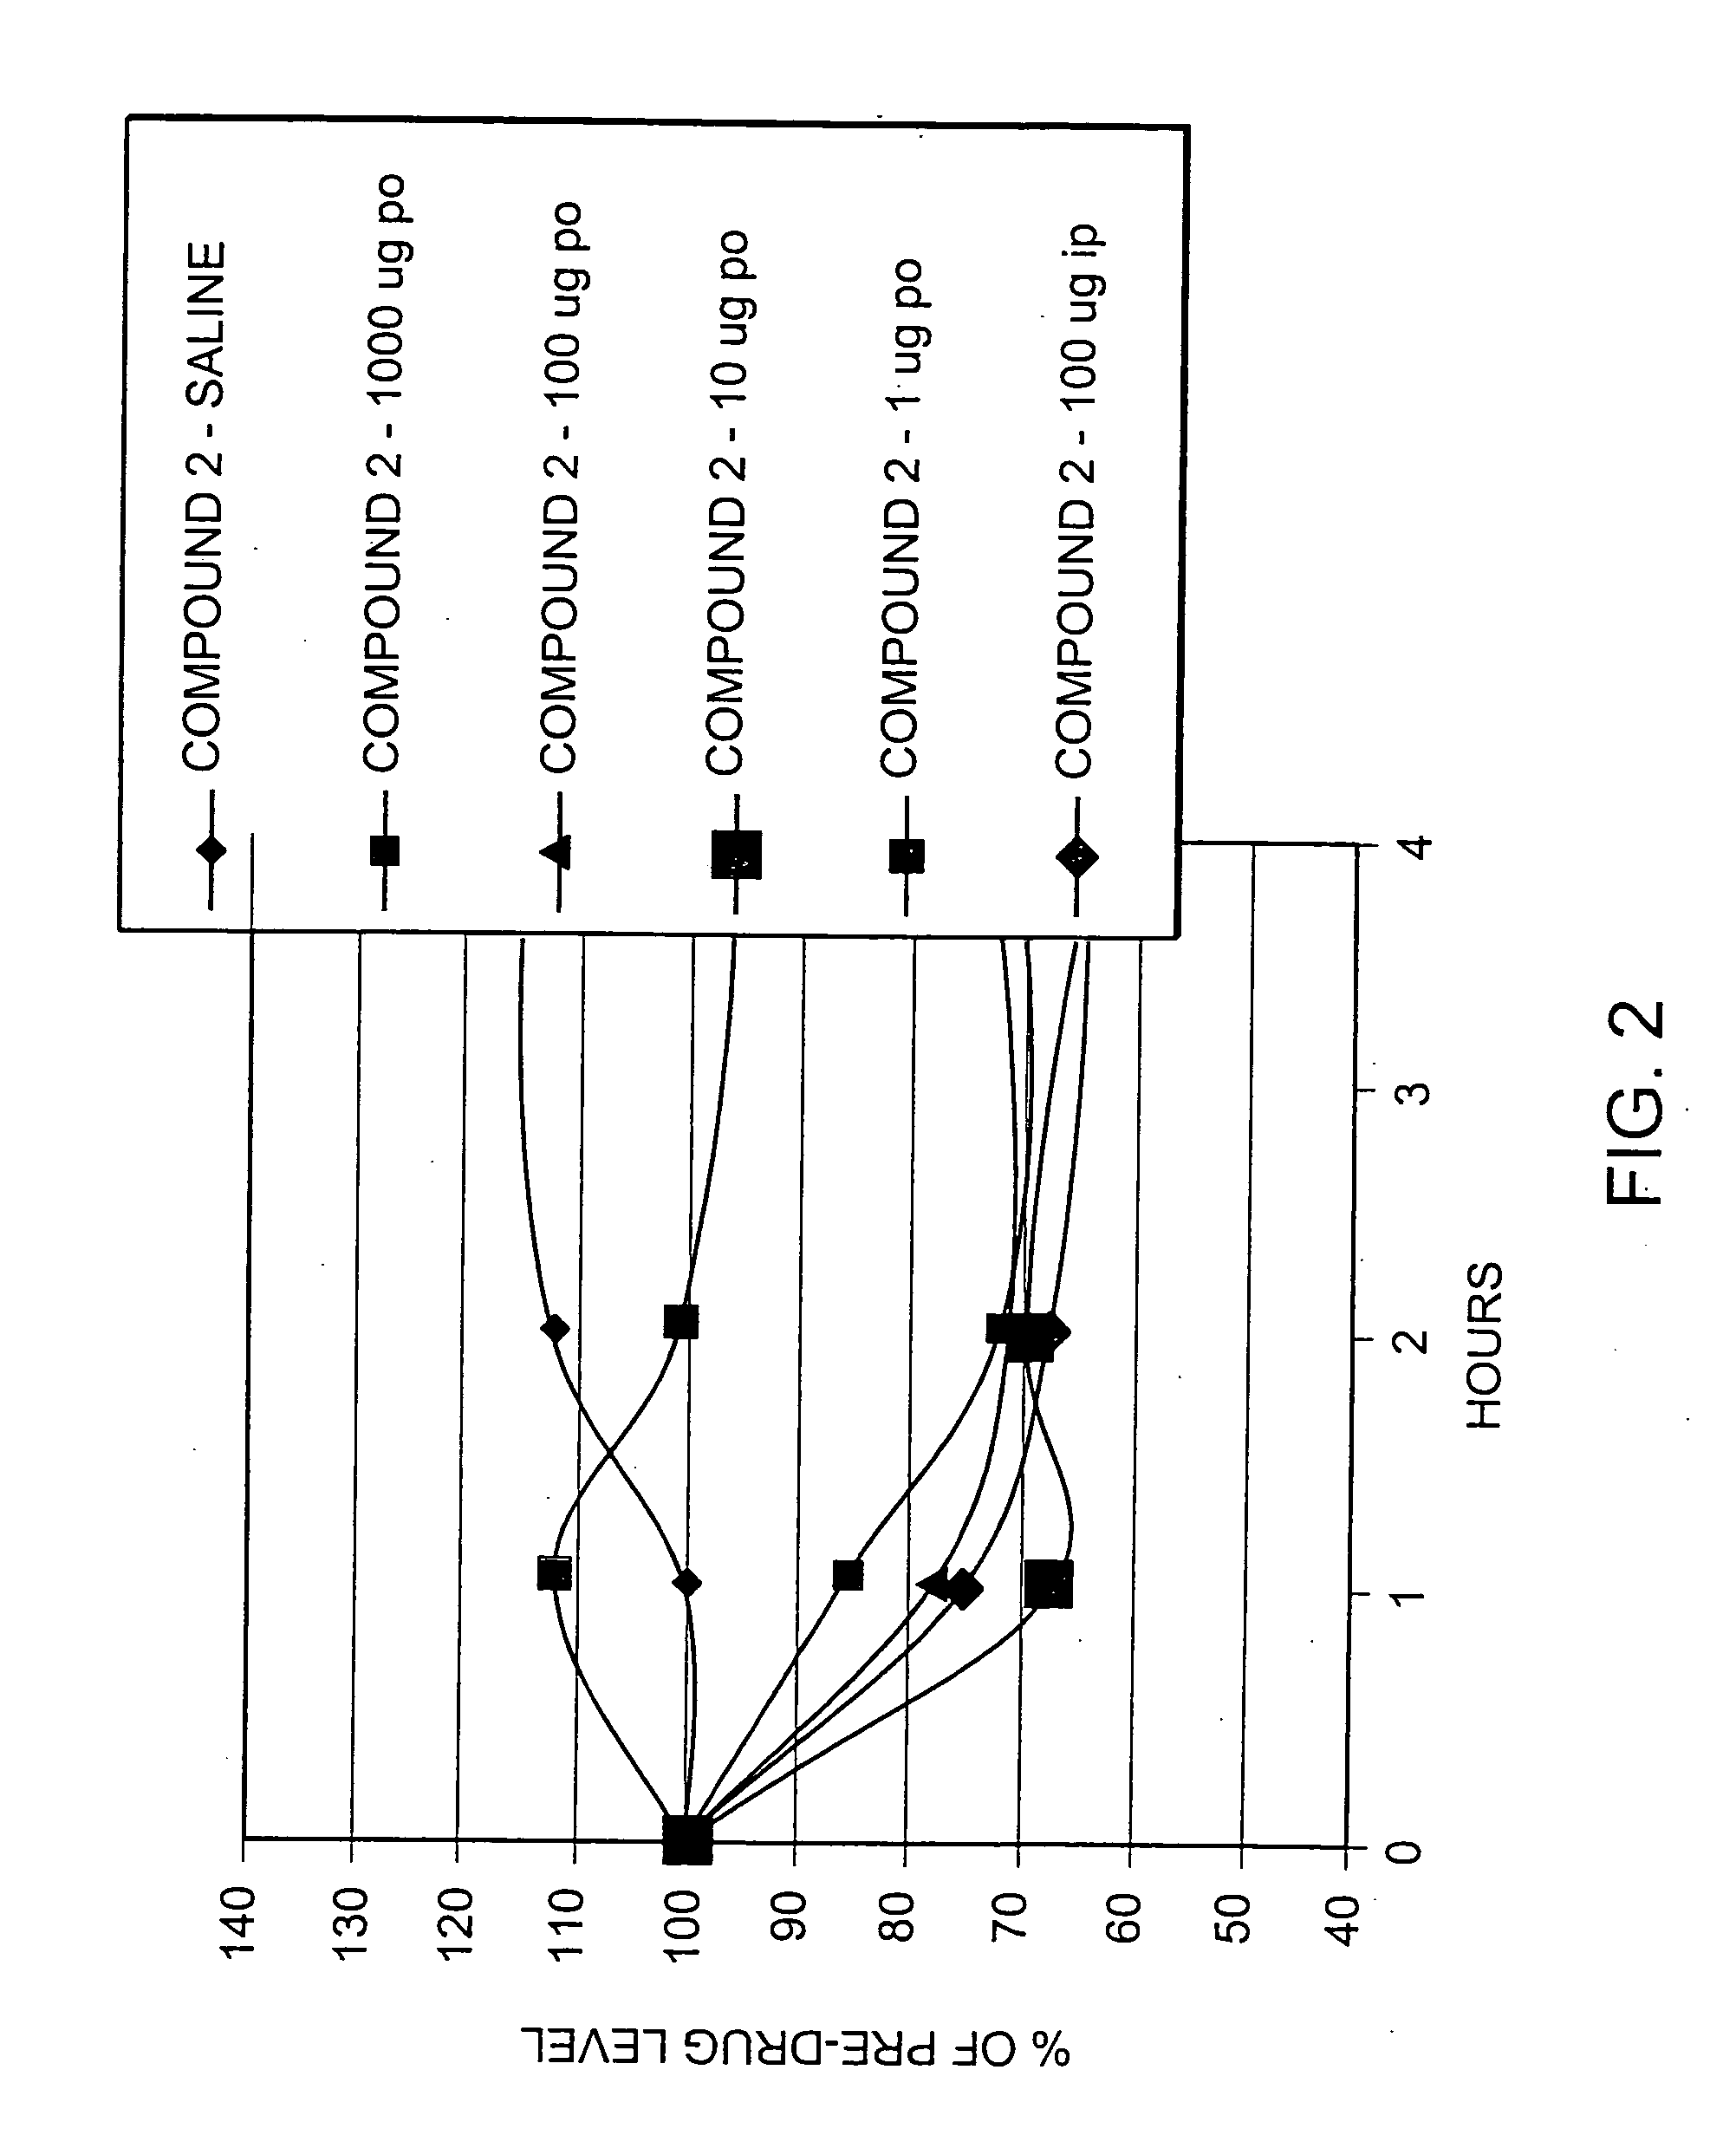 Peptide agonists of GLP-1 activity